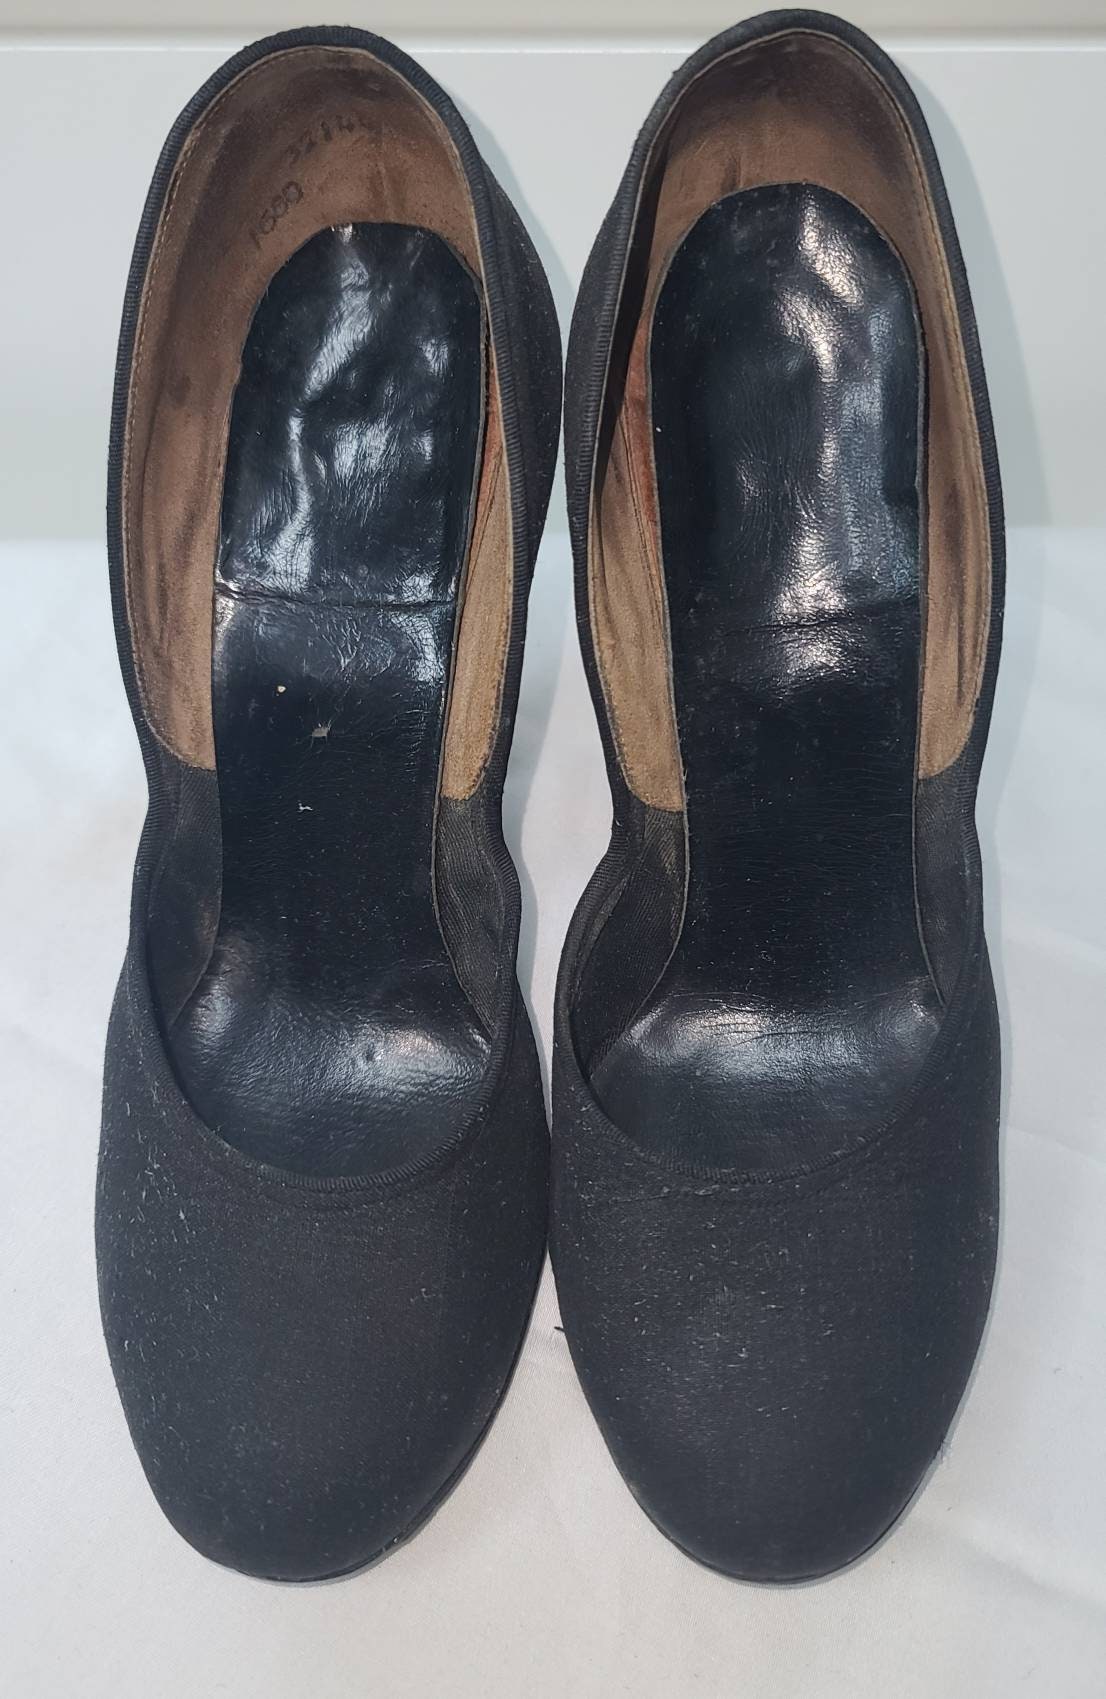 Vintage 1940s Shoes Black Fabric High Heels Round Toes Film Noir Rockabilly WWII sz 4.5